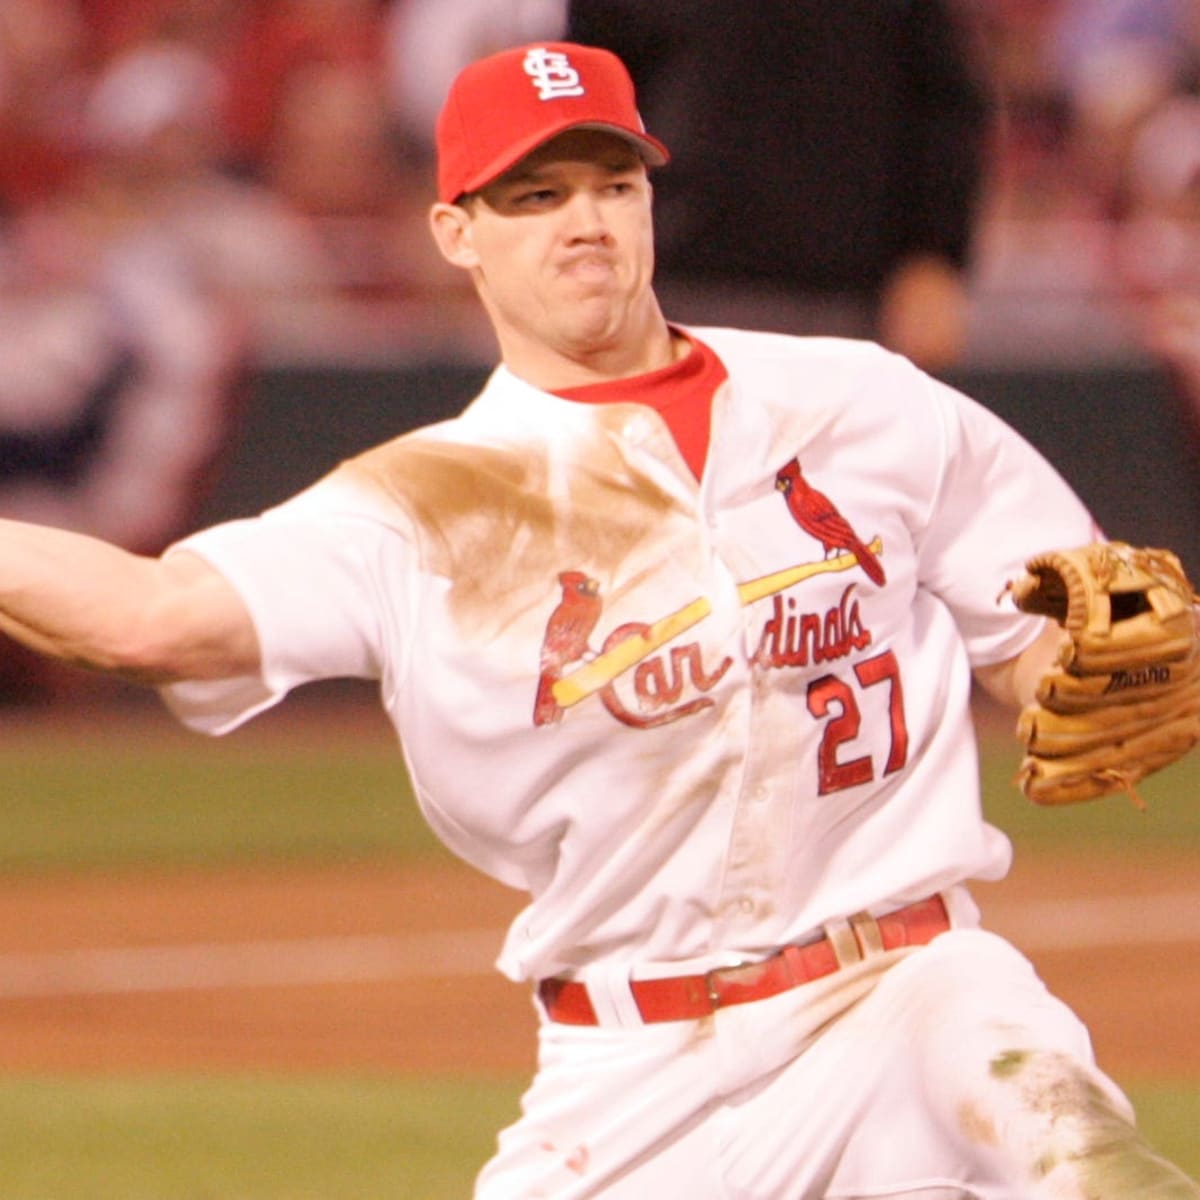 Scott Rolen's return to Philadelphia — It's time to turn the page